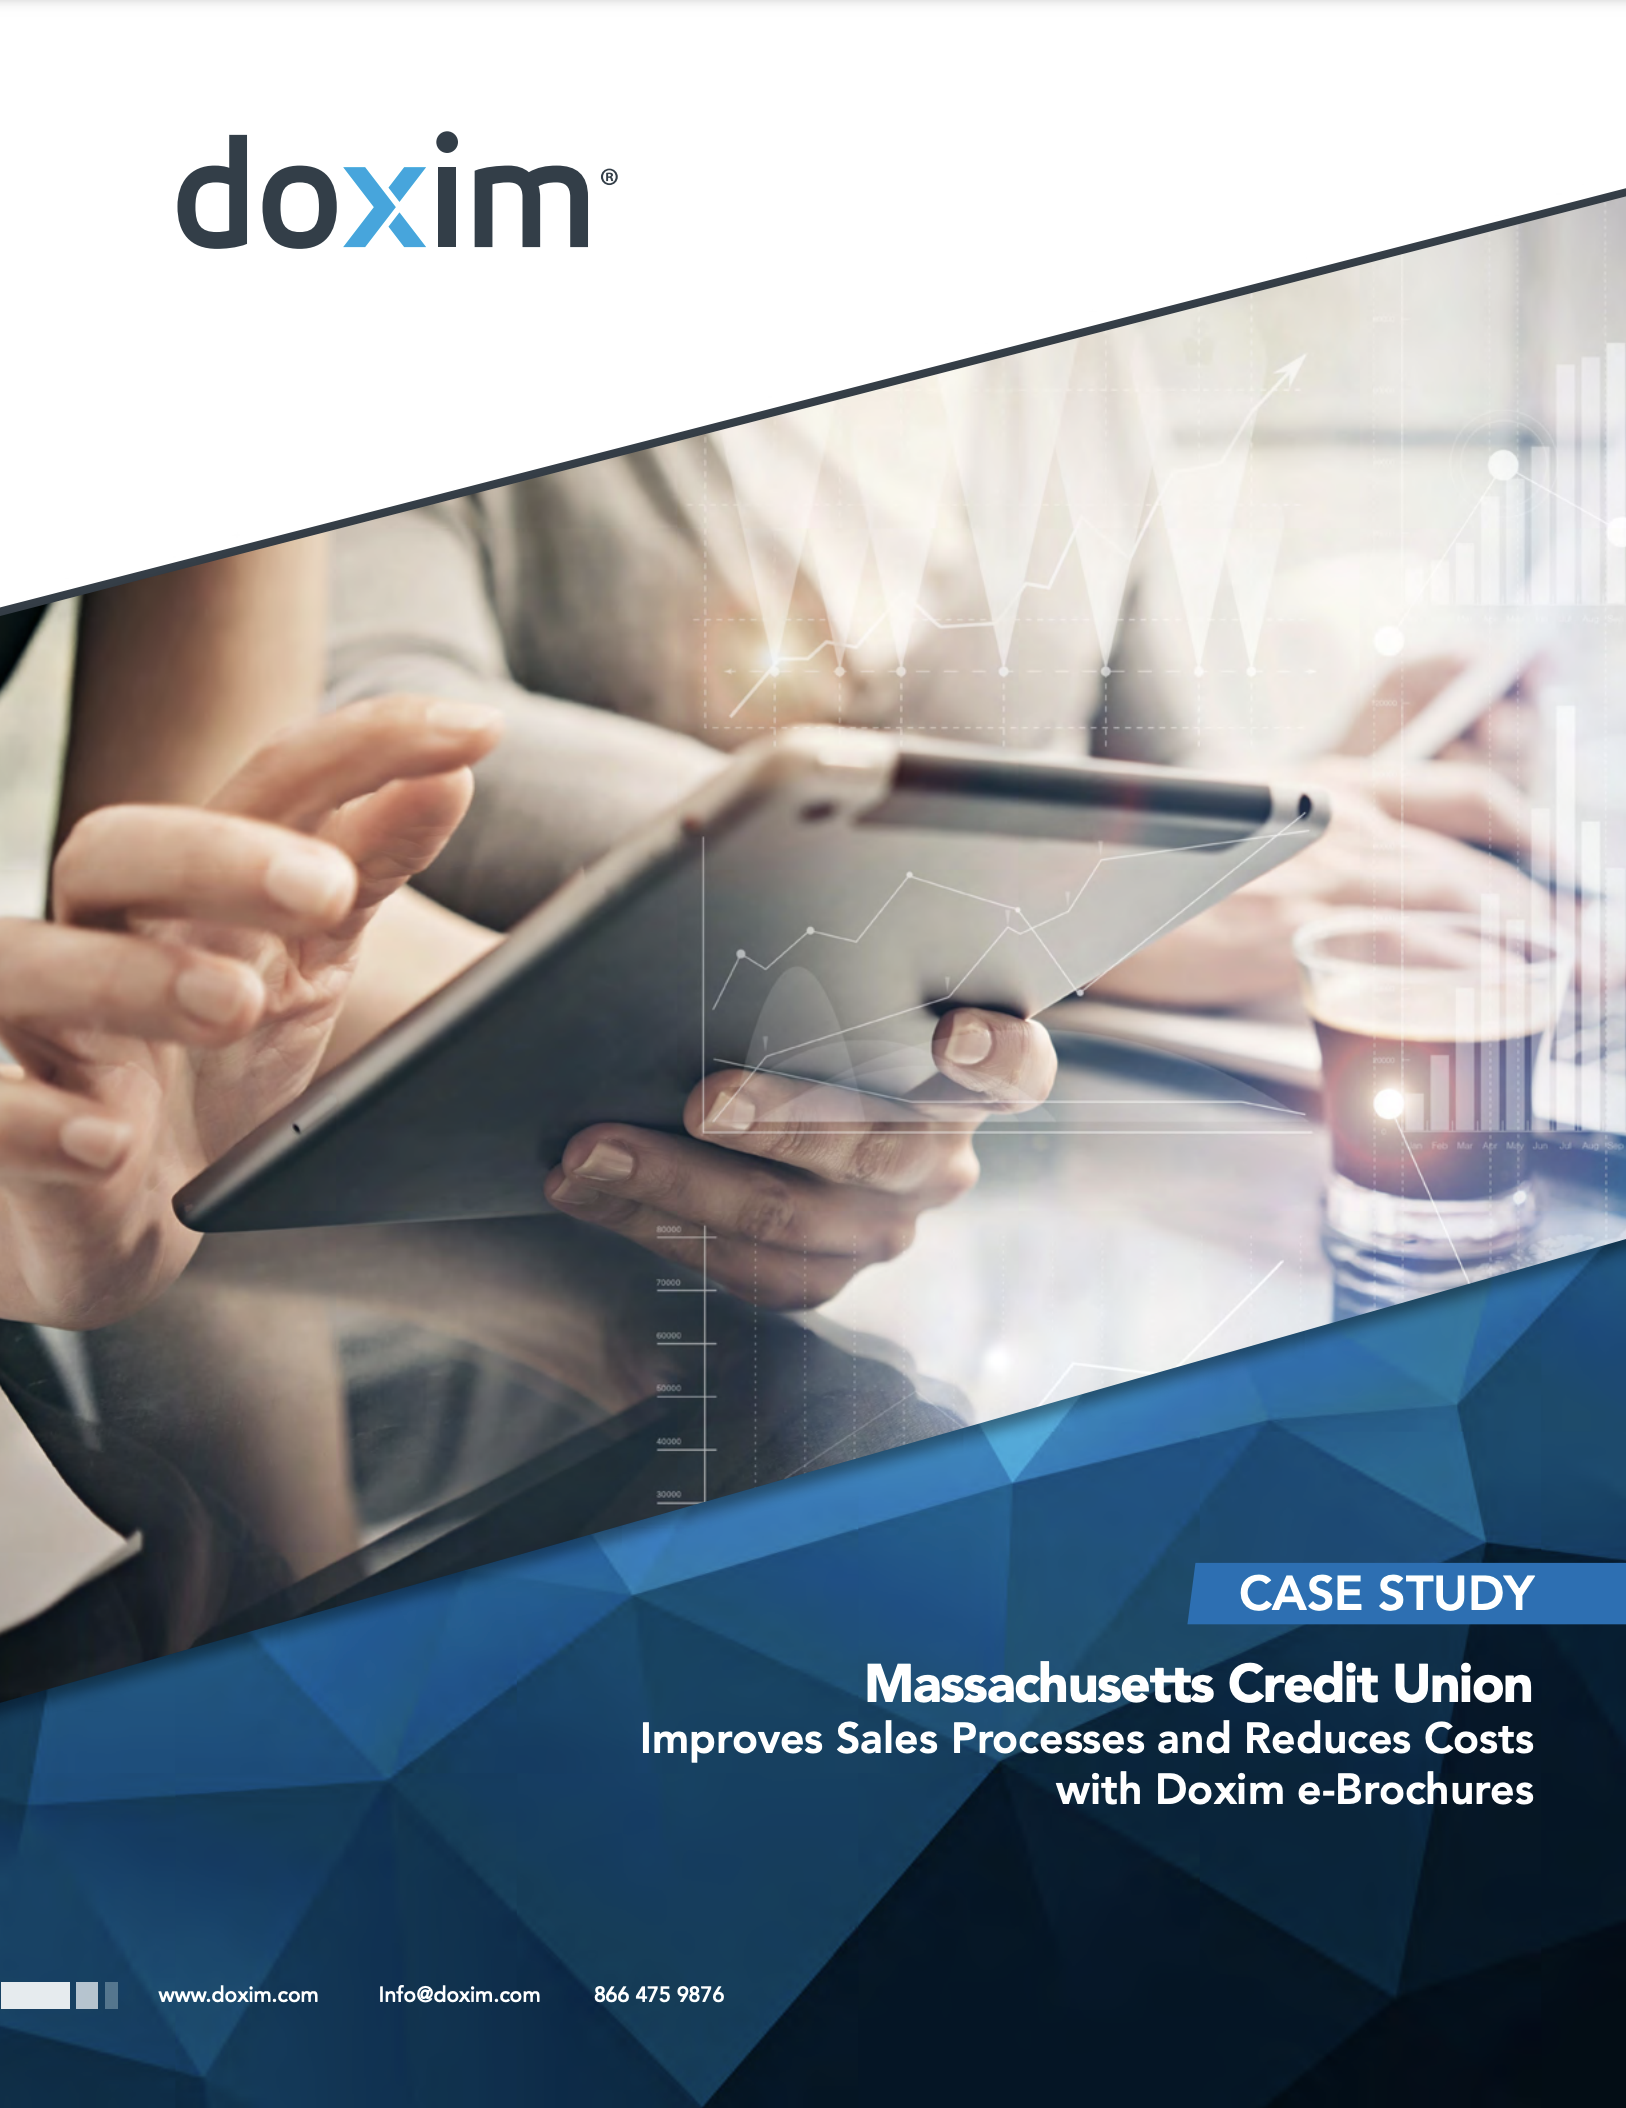 Case study: Massachusetts Credit Union Improves Sales Processes and Reduces Costs with Doxim e-Brochures